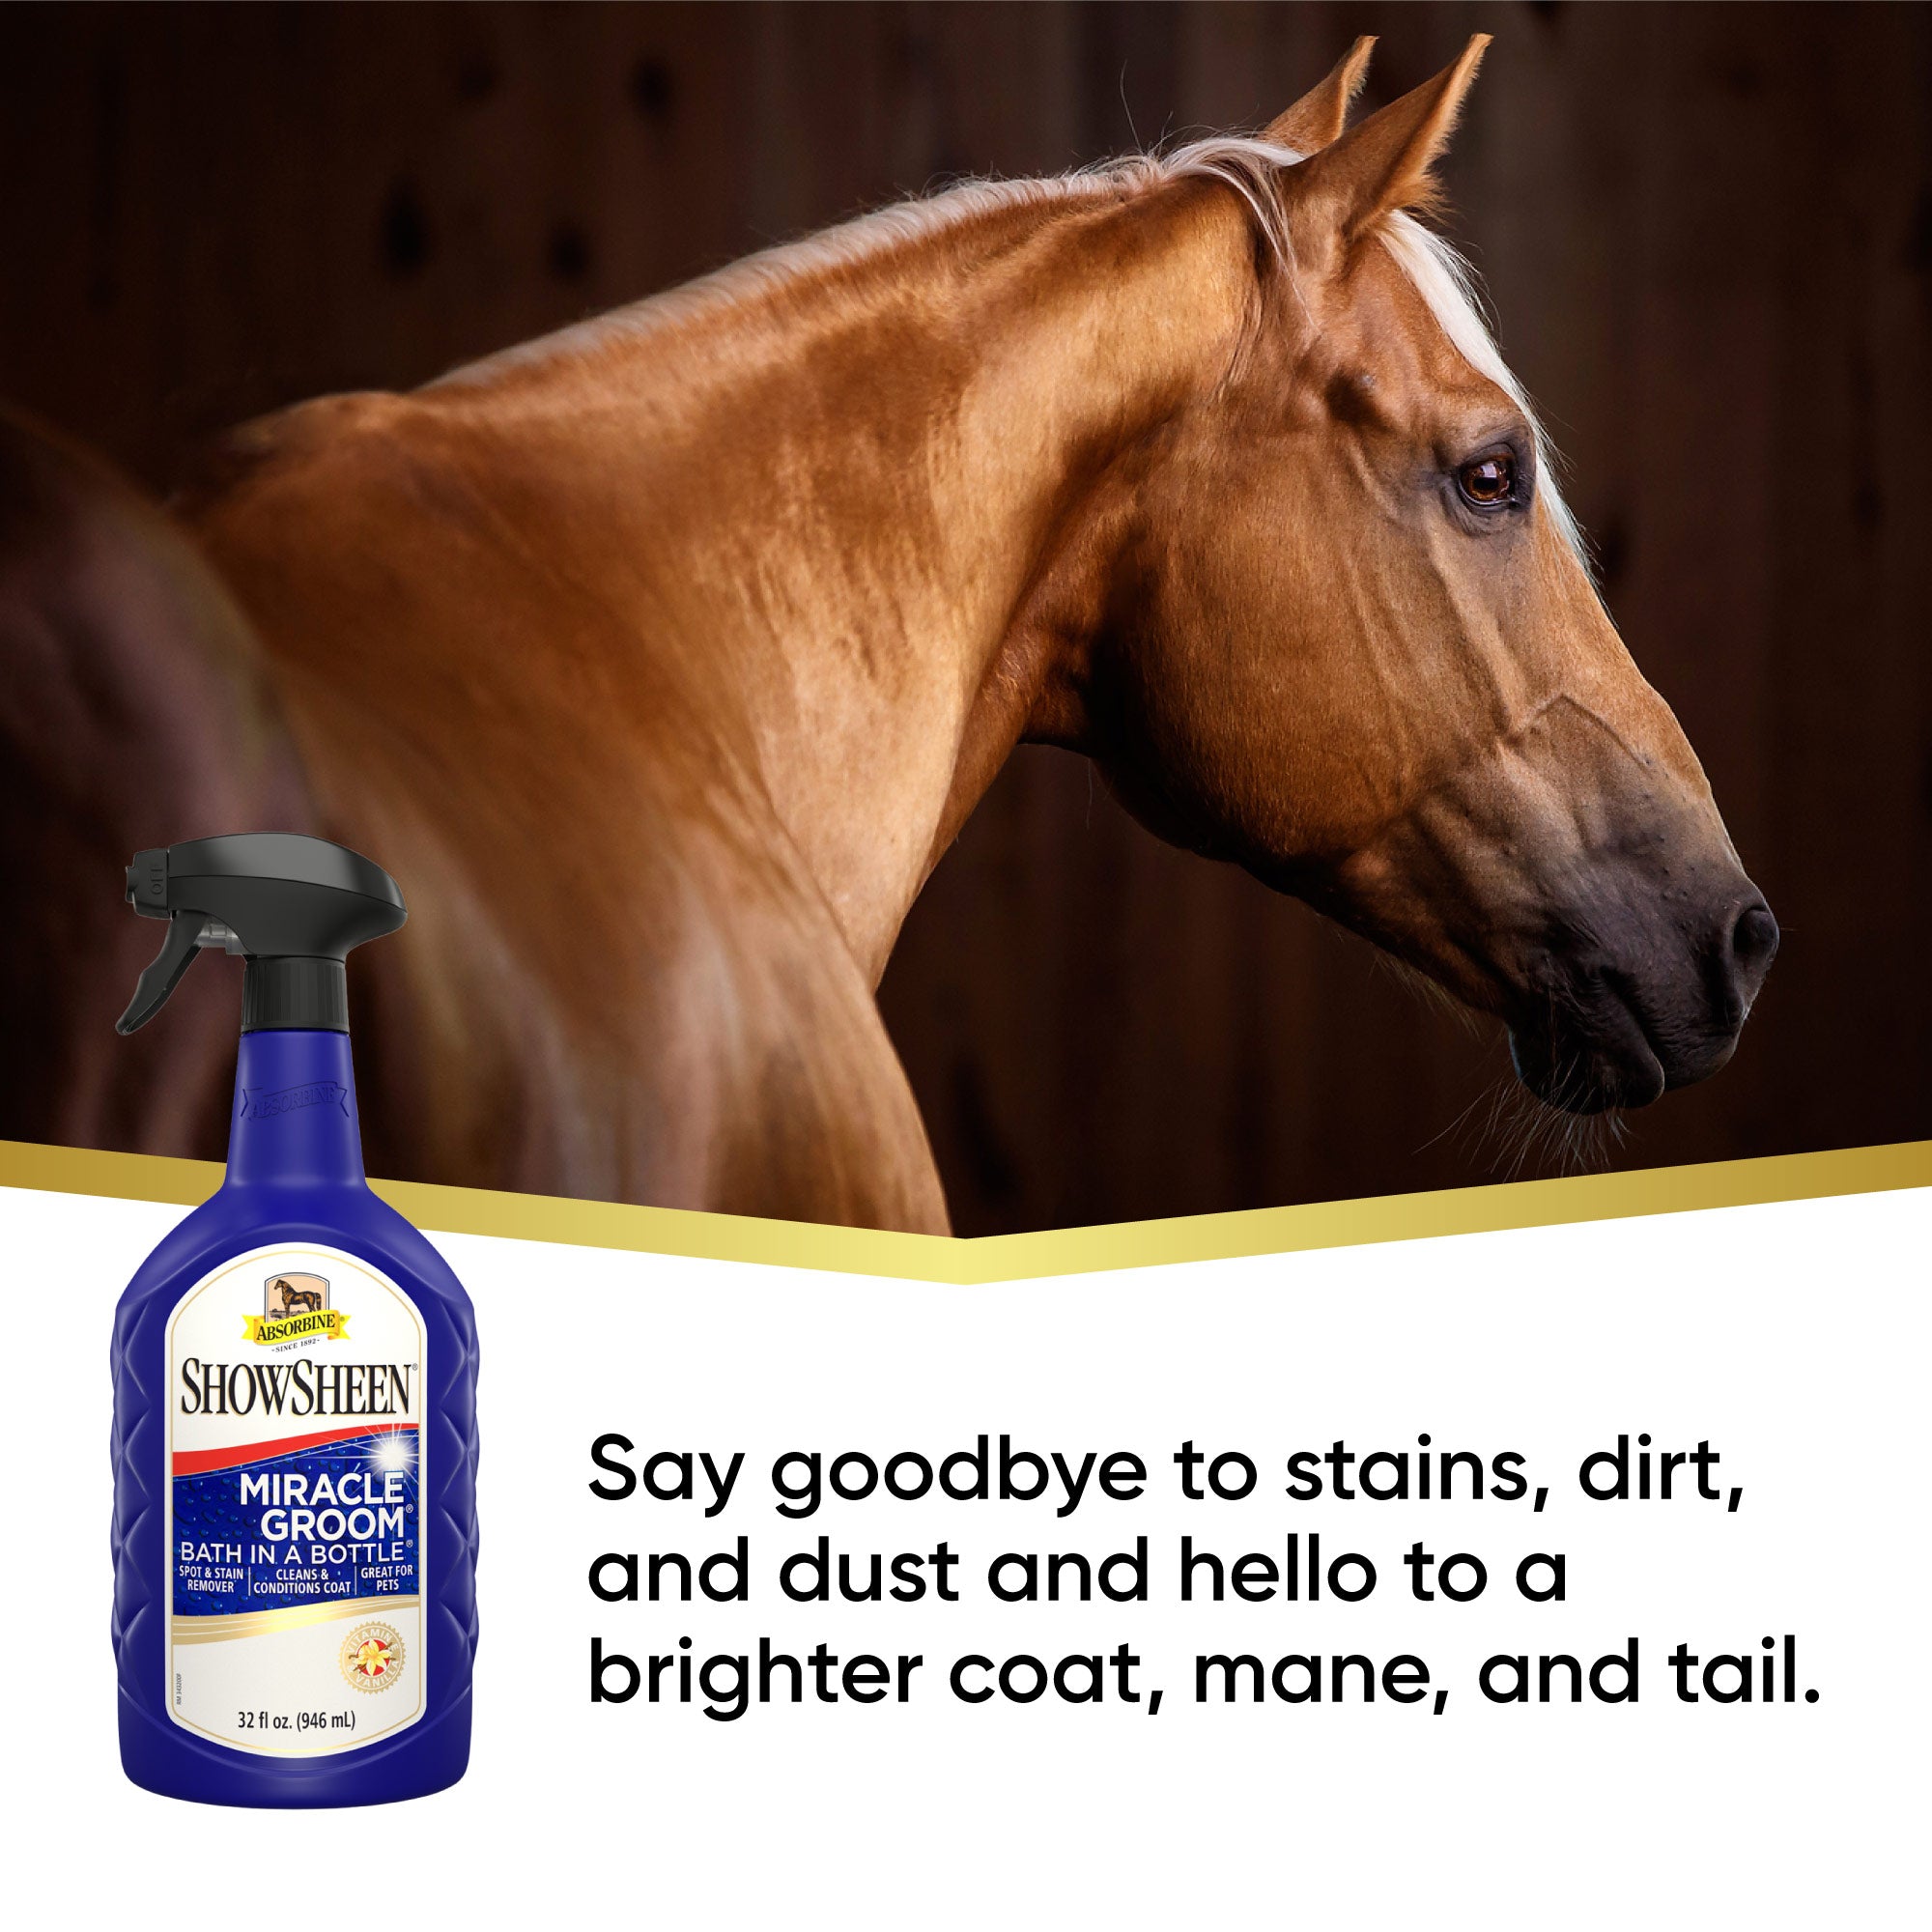 Beautiful brown horse, gold banner with white background and a bottle of blue Showsheen Miracle Groom Bath in a Bottle.  Say goodbye to stains, dirt, and dust and hello to a brighter coat, mane and tail.